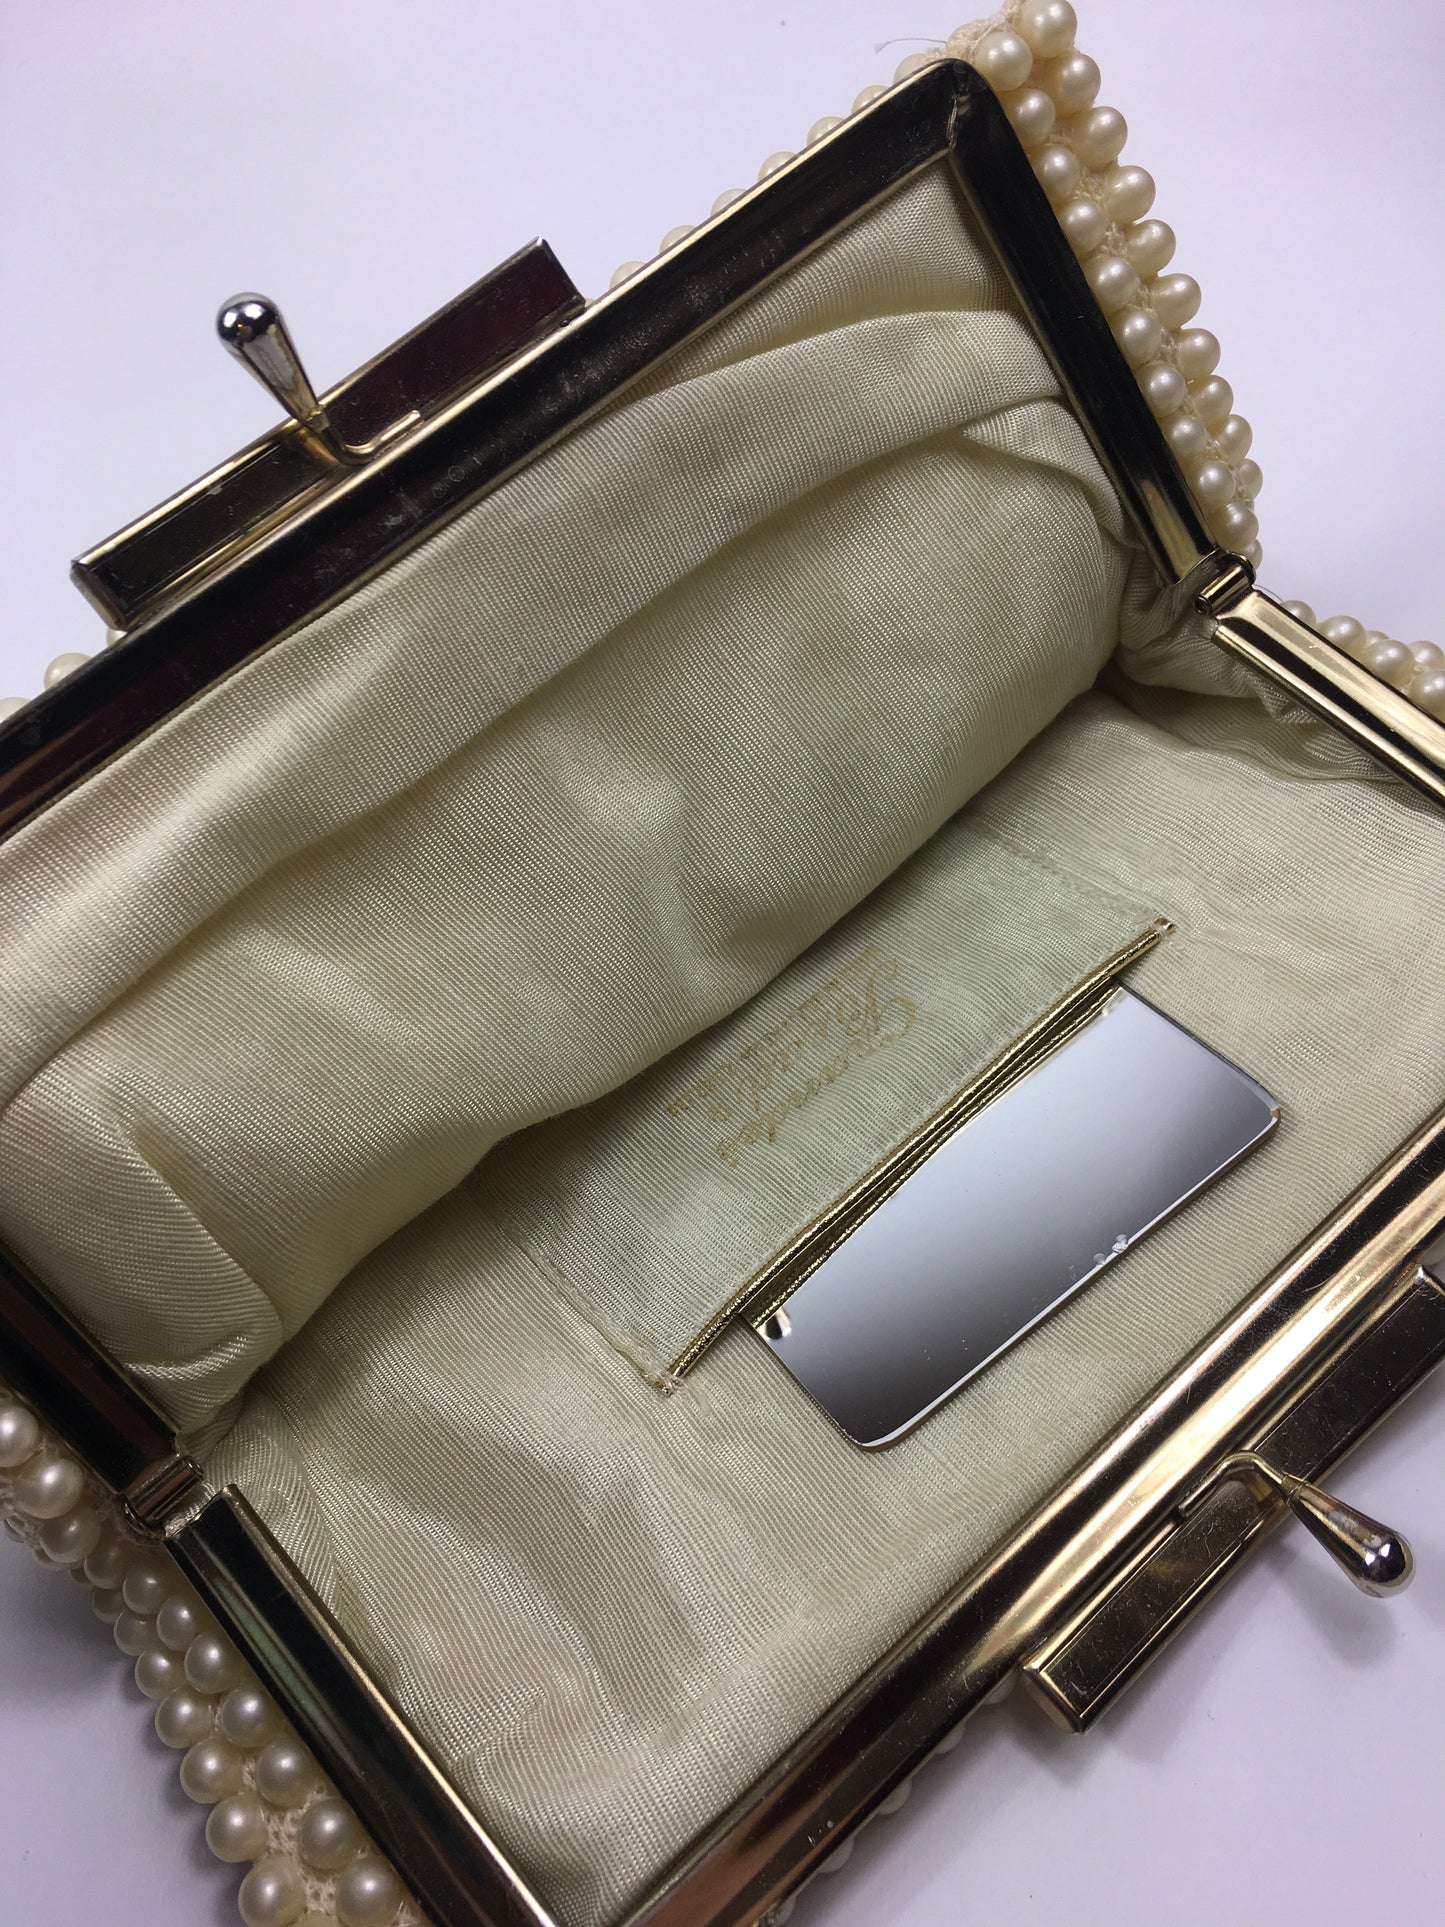 Original 1950’s Fabulous Pearly Handbag - In A Lovely Warm Cream With Internal Pocket Mirror